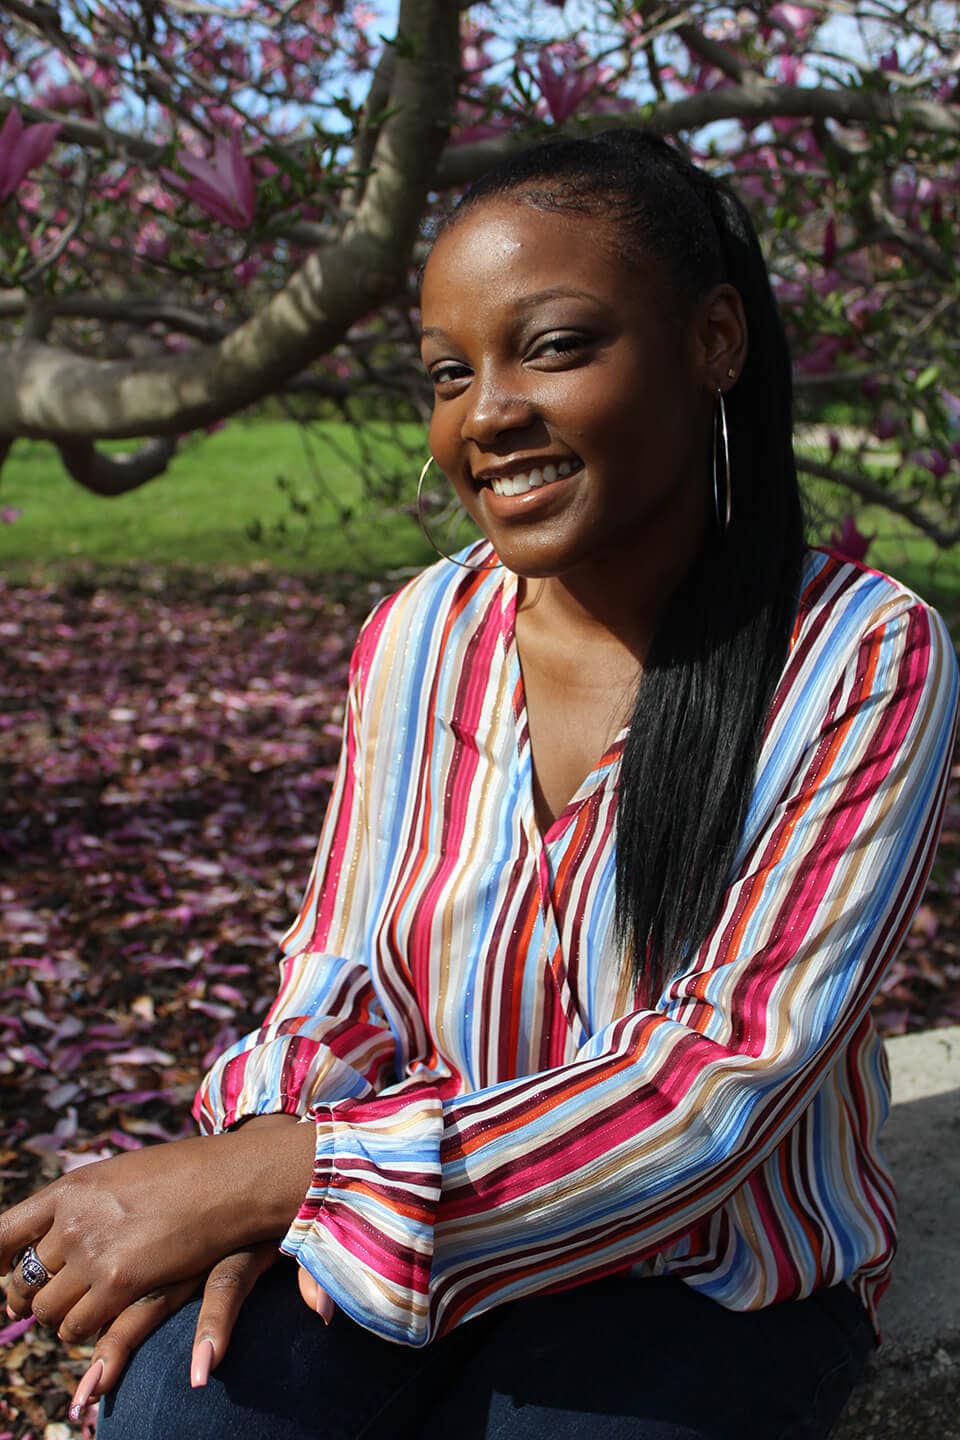 Blog author Jayla Pope is outside standing in front of a tree. Her long black hair is in a ponytail and she is wearing large silver hoop earrings and a colorful striped blouse.